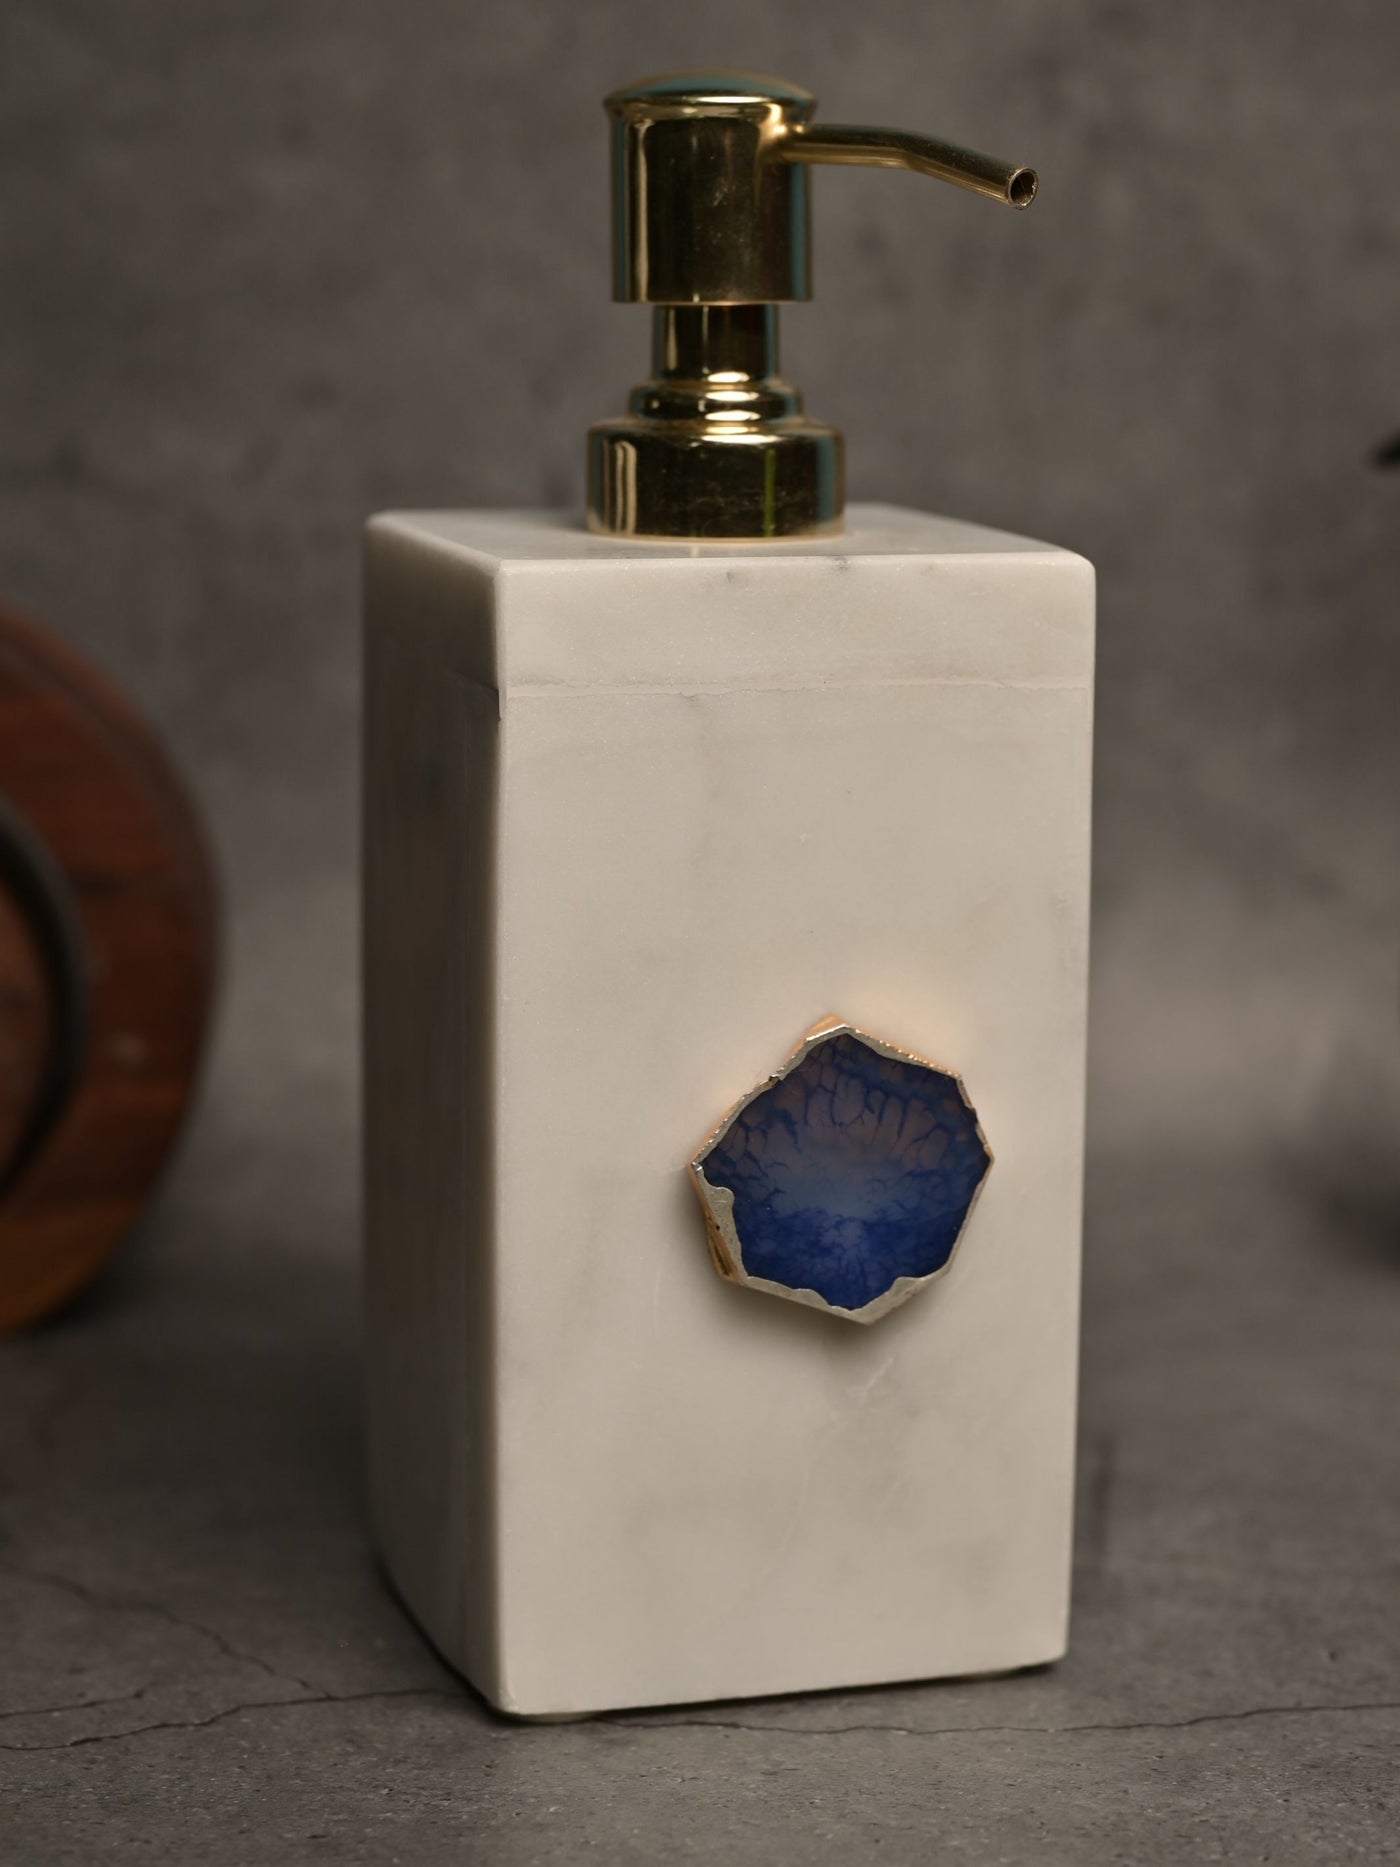 Blue Agate with Marble Soap Dispenser